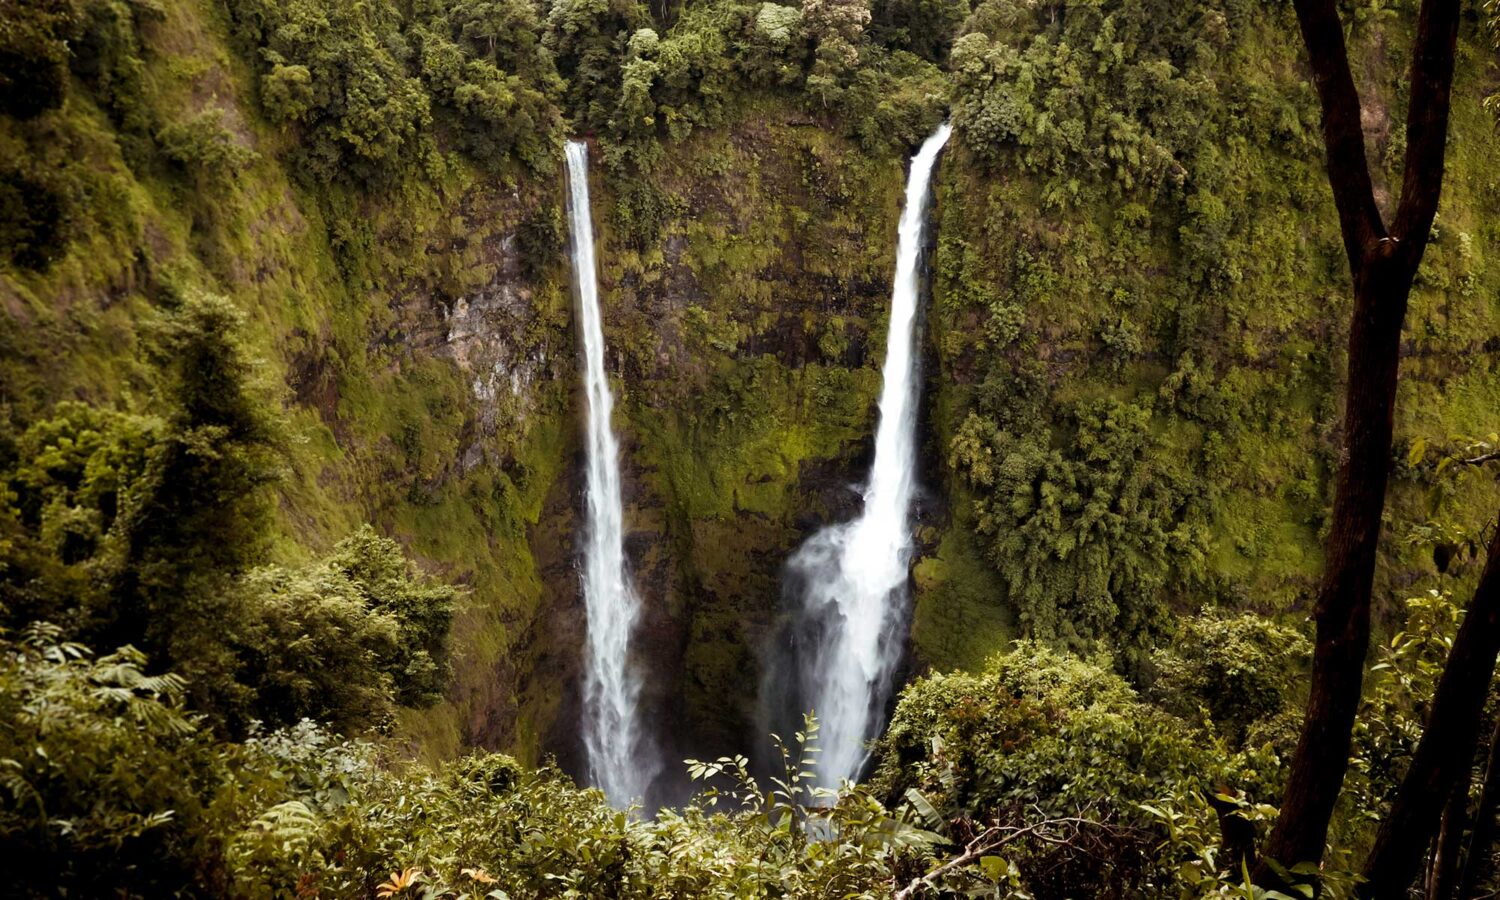 The double streams of Tad Fane, the highest waterfalls of Laos on this Bolaven Plateau itinerary